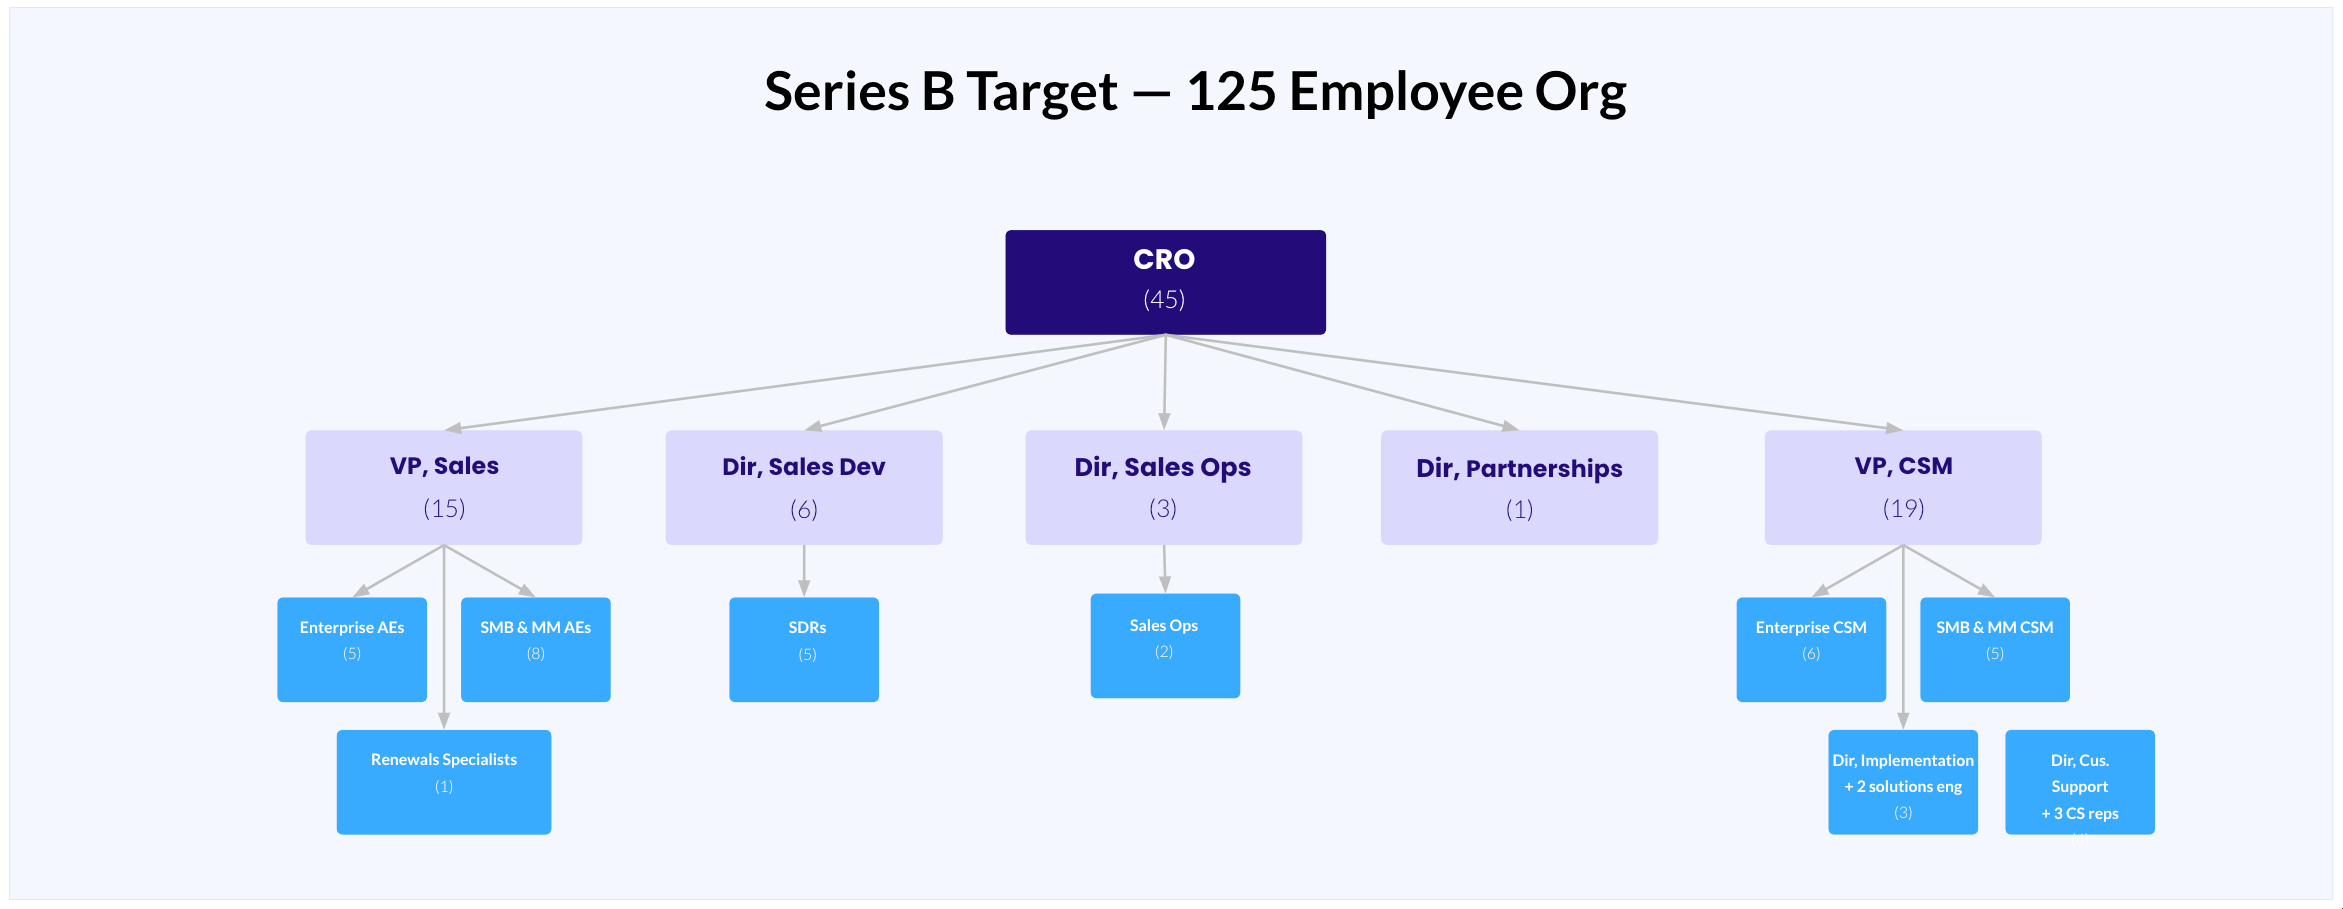 A typical sales team structure for a Series B startup with ~125 employees